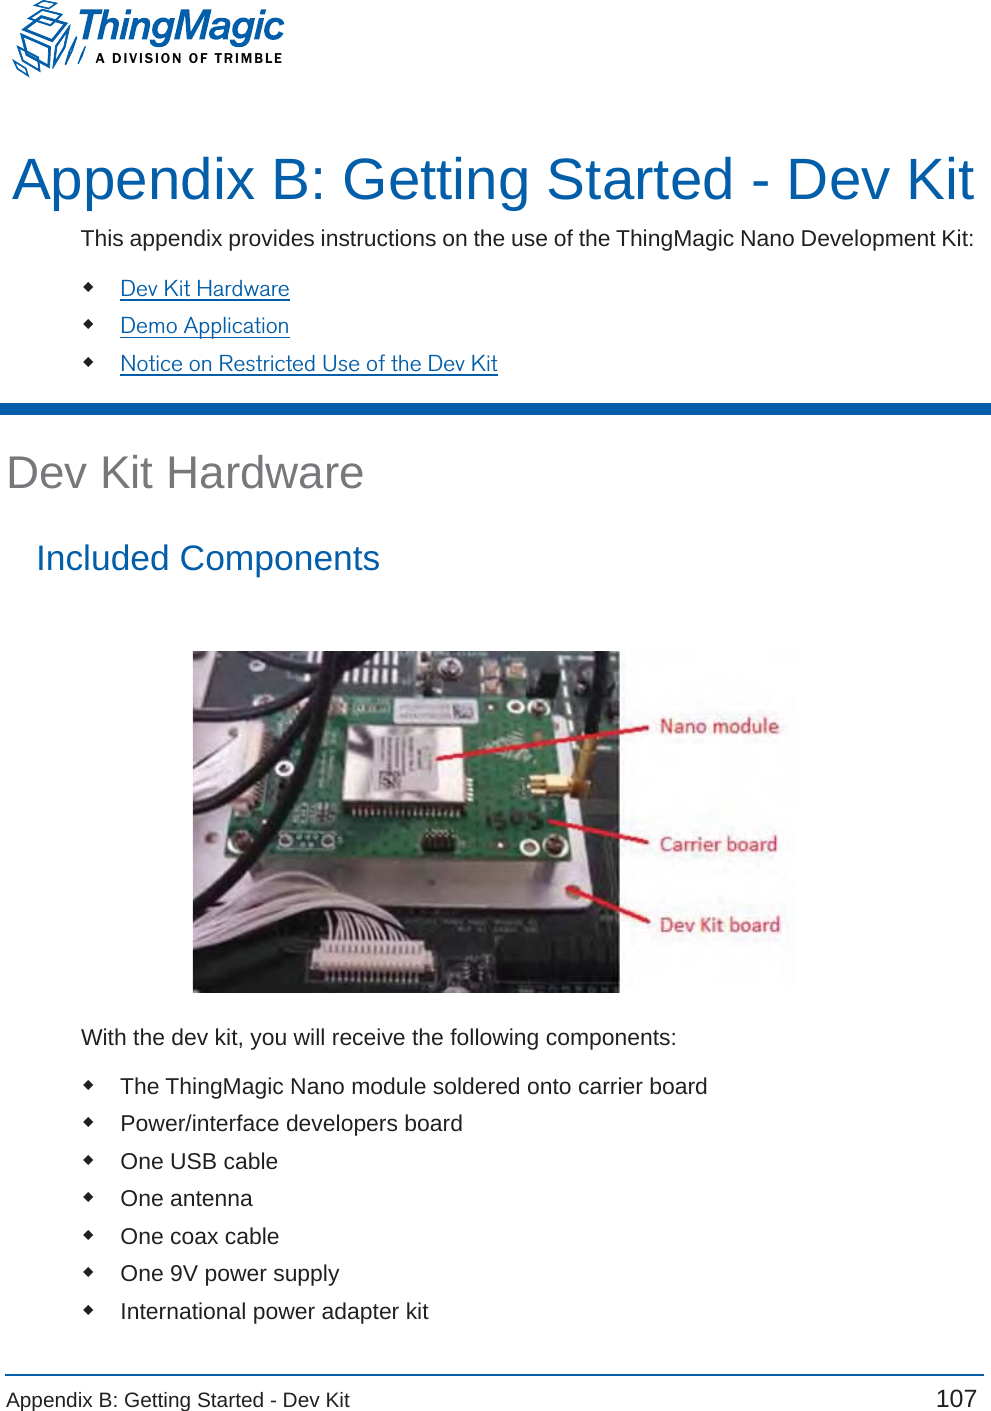 Appendix B: Getting Started - Dev Kit  107 A DIVISION OF TRIMBLEAppendix B: Getting Started - Dev KitThis appendix provides instructions on the use of the ThingMagic Nano Development Kit: Dev Kit HardwareDemo ApplicationNotice on Restricted Use of the Dev KitDev Kit HardwareIncluded ComponentsWith the dev kit, you will receive the following components:The ThingMagic Nano module soldered onto carrier boardPower/interface developers boardOne USB cableOne antenna One coax cableOne 9V power supplyInternational power adapter kit 